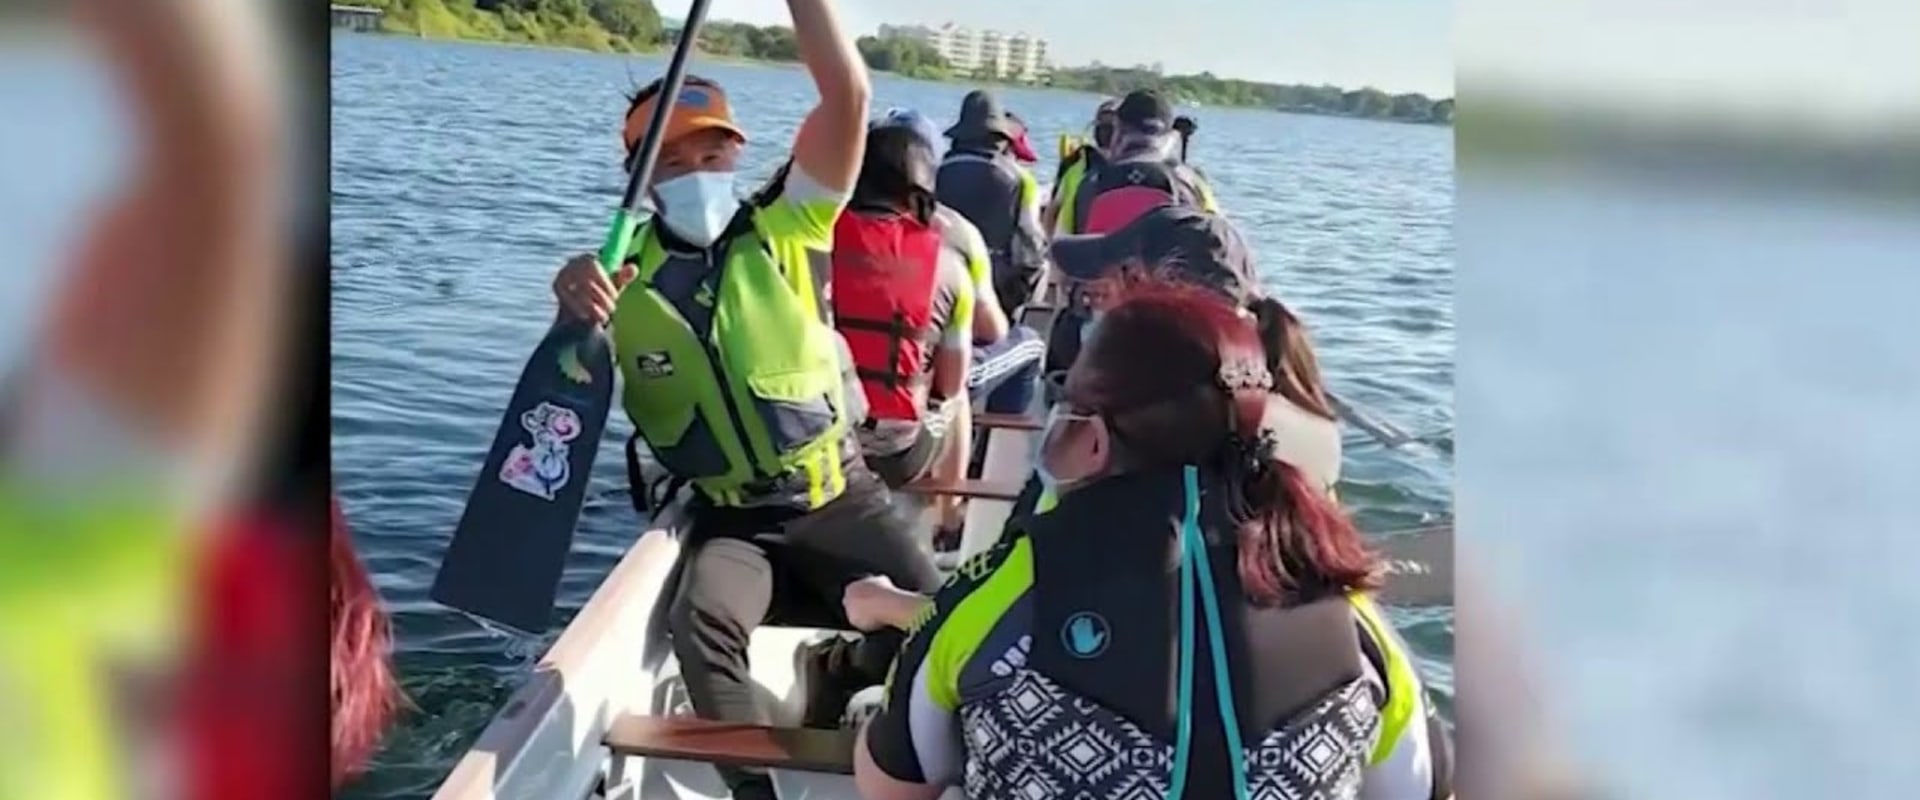 Safety Considerations for Dragon Boat Racing in Orlando, FL